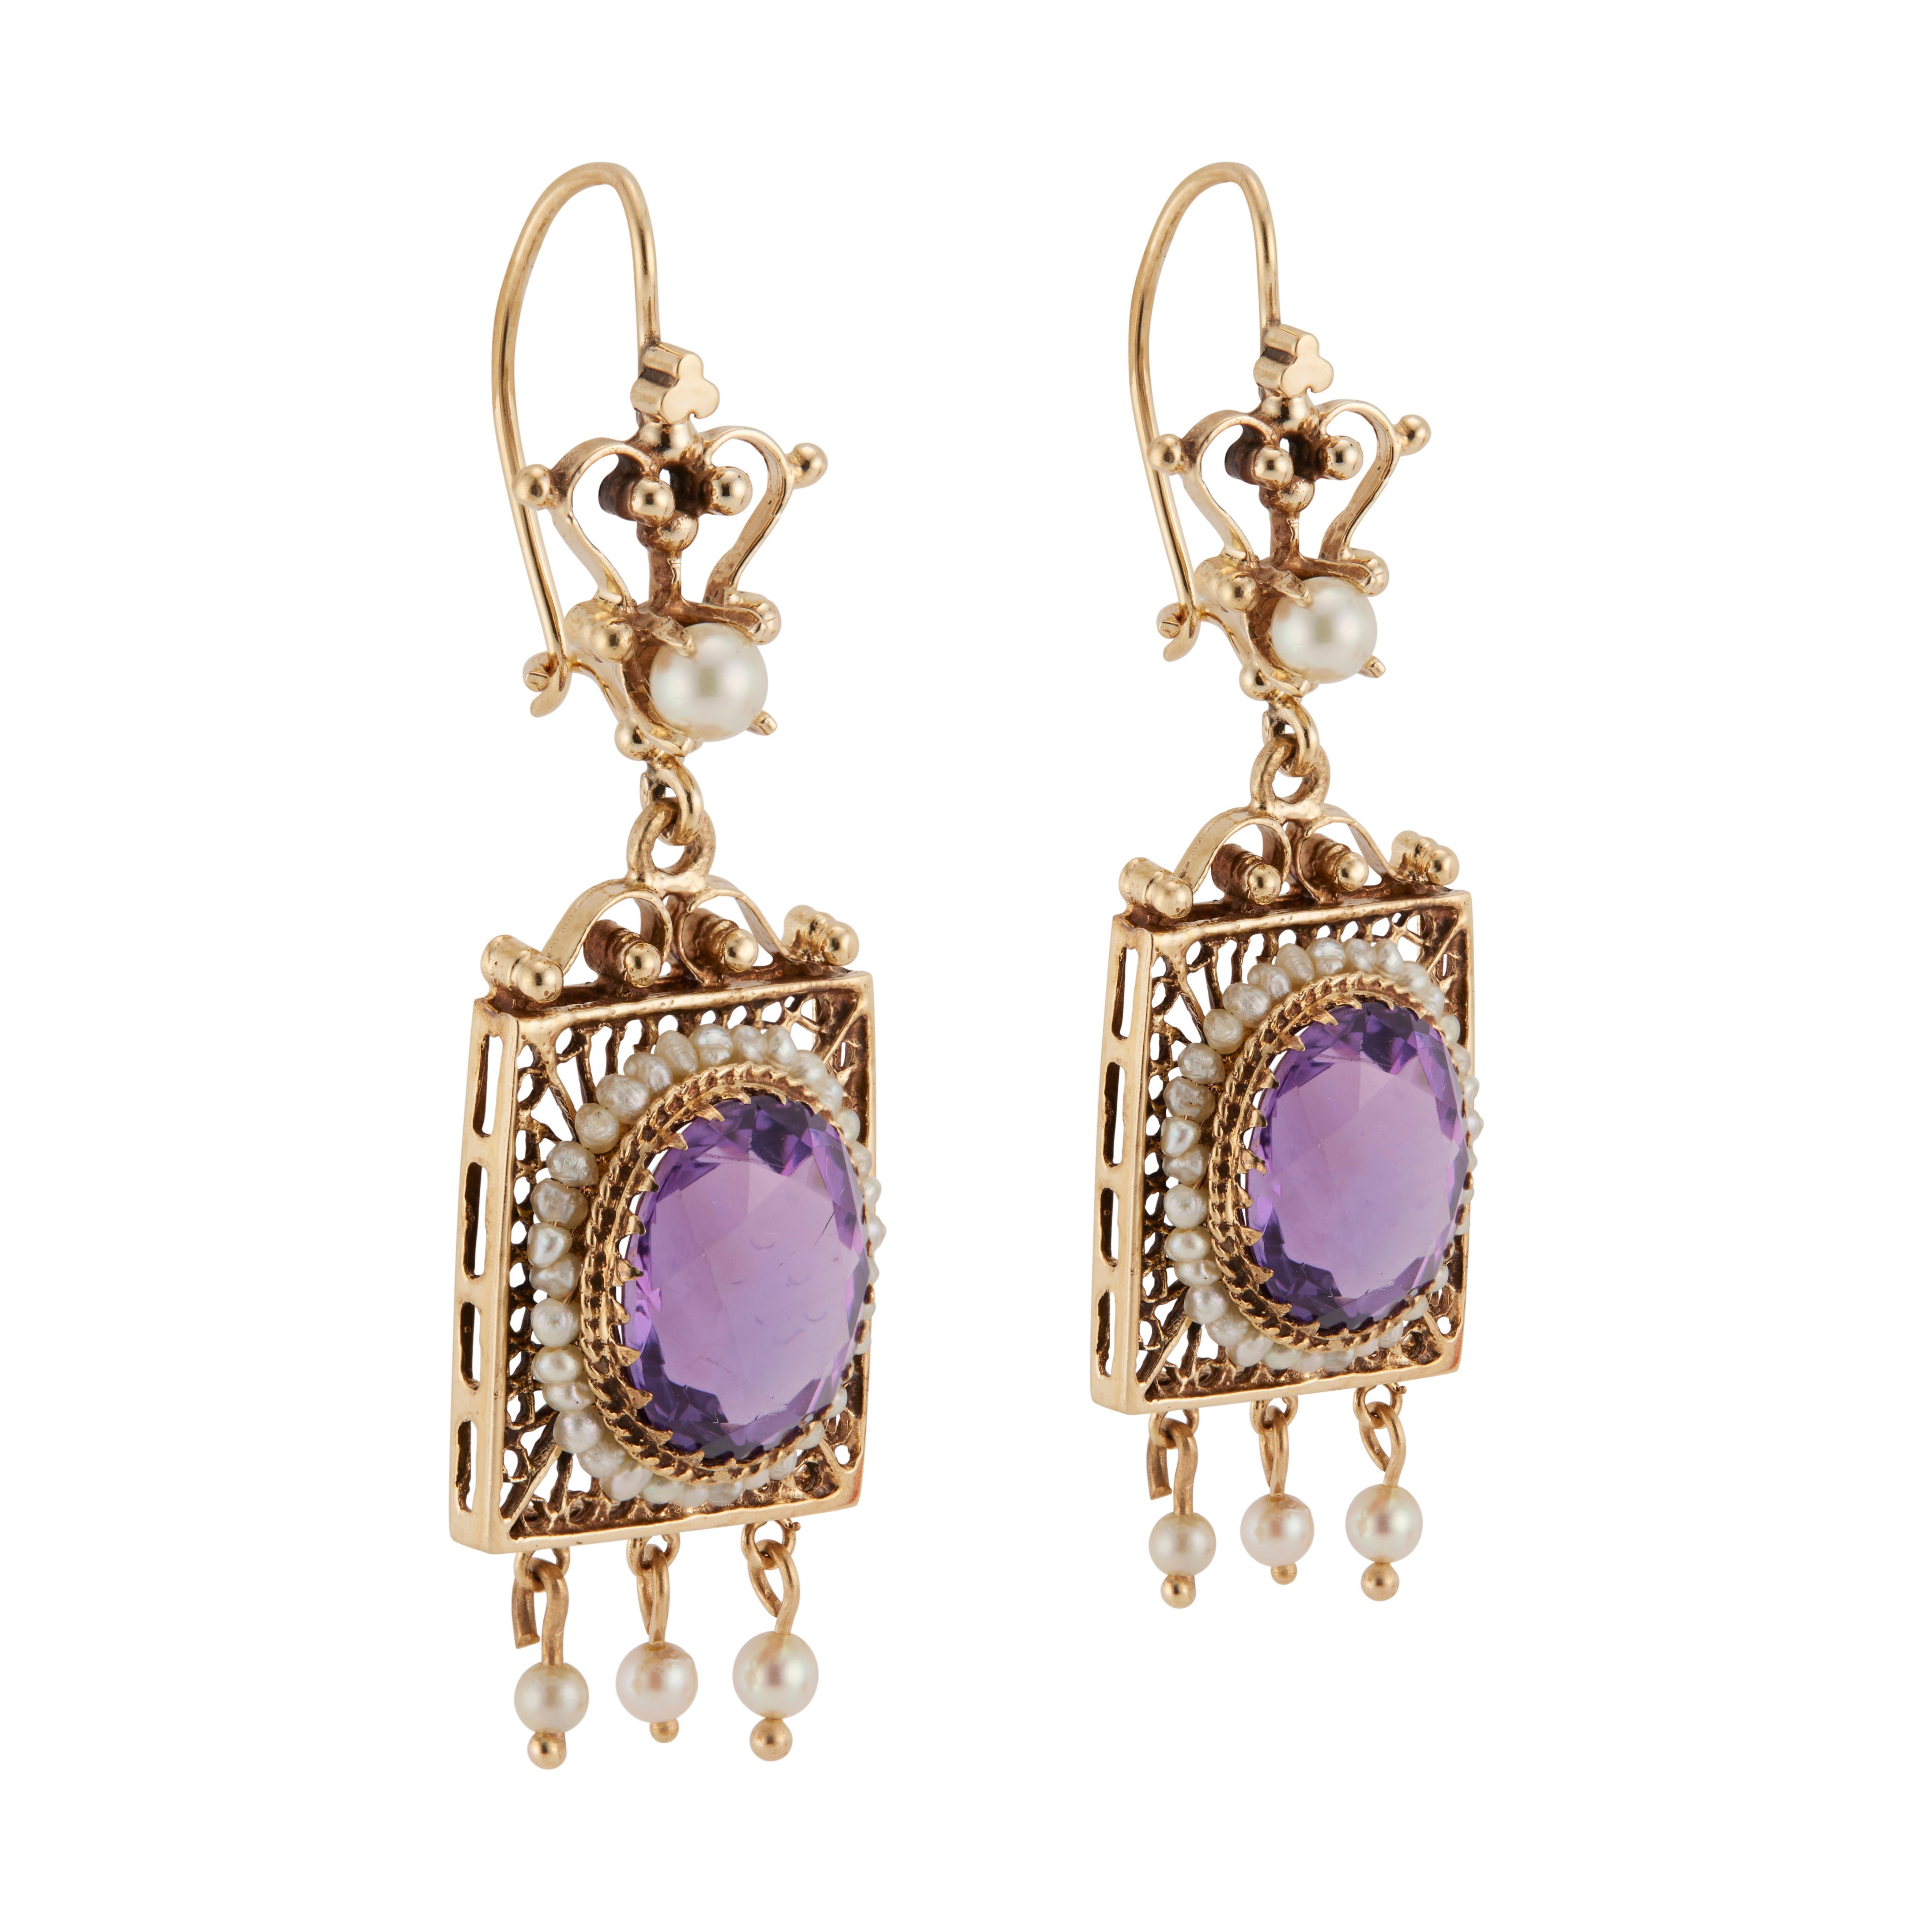 1940's Victorian revival Amethyst and pearl dangle earrings. 2 oval shaped genuine amethysts, each with a halo of pearls set in 14k yellow gold dangle settings accented with 3 pearl dangles on each frame with a pearl above the frame.  

2 oval